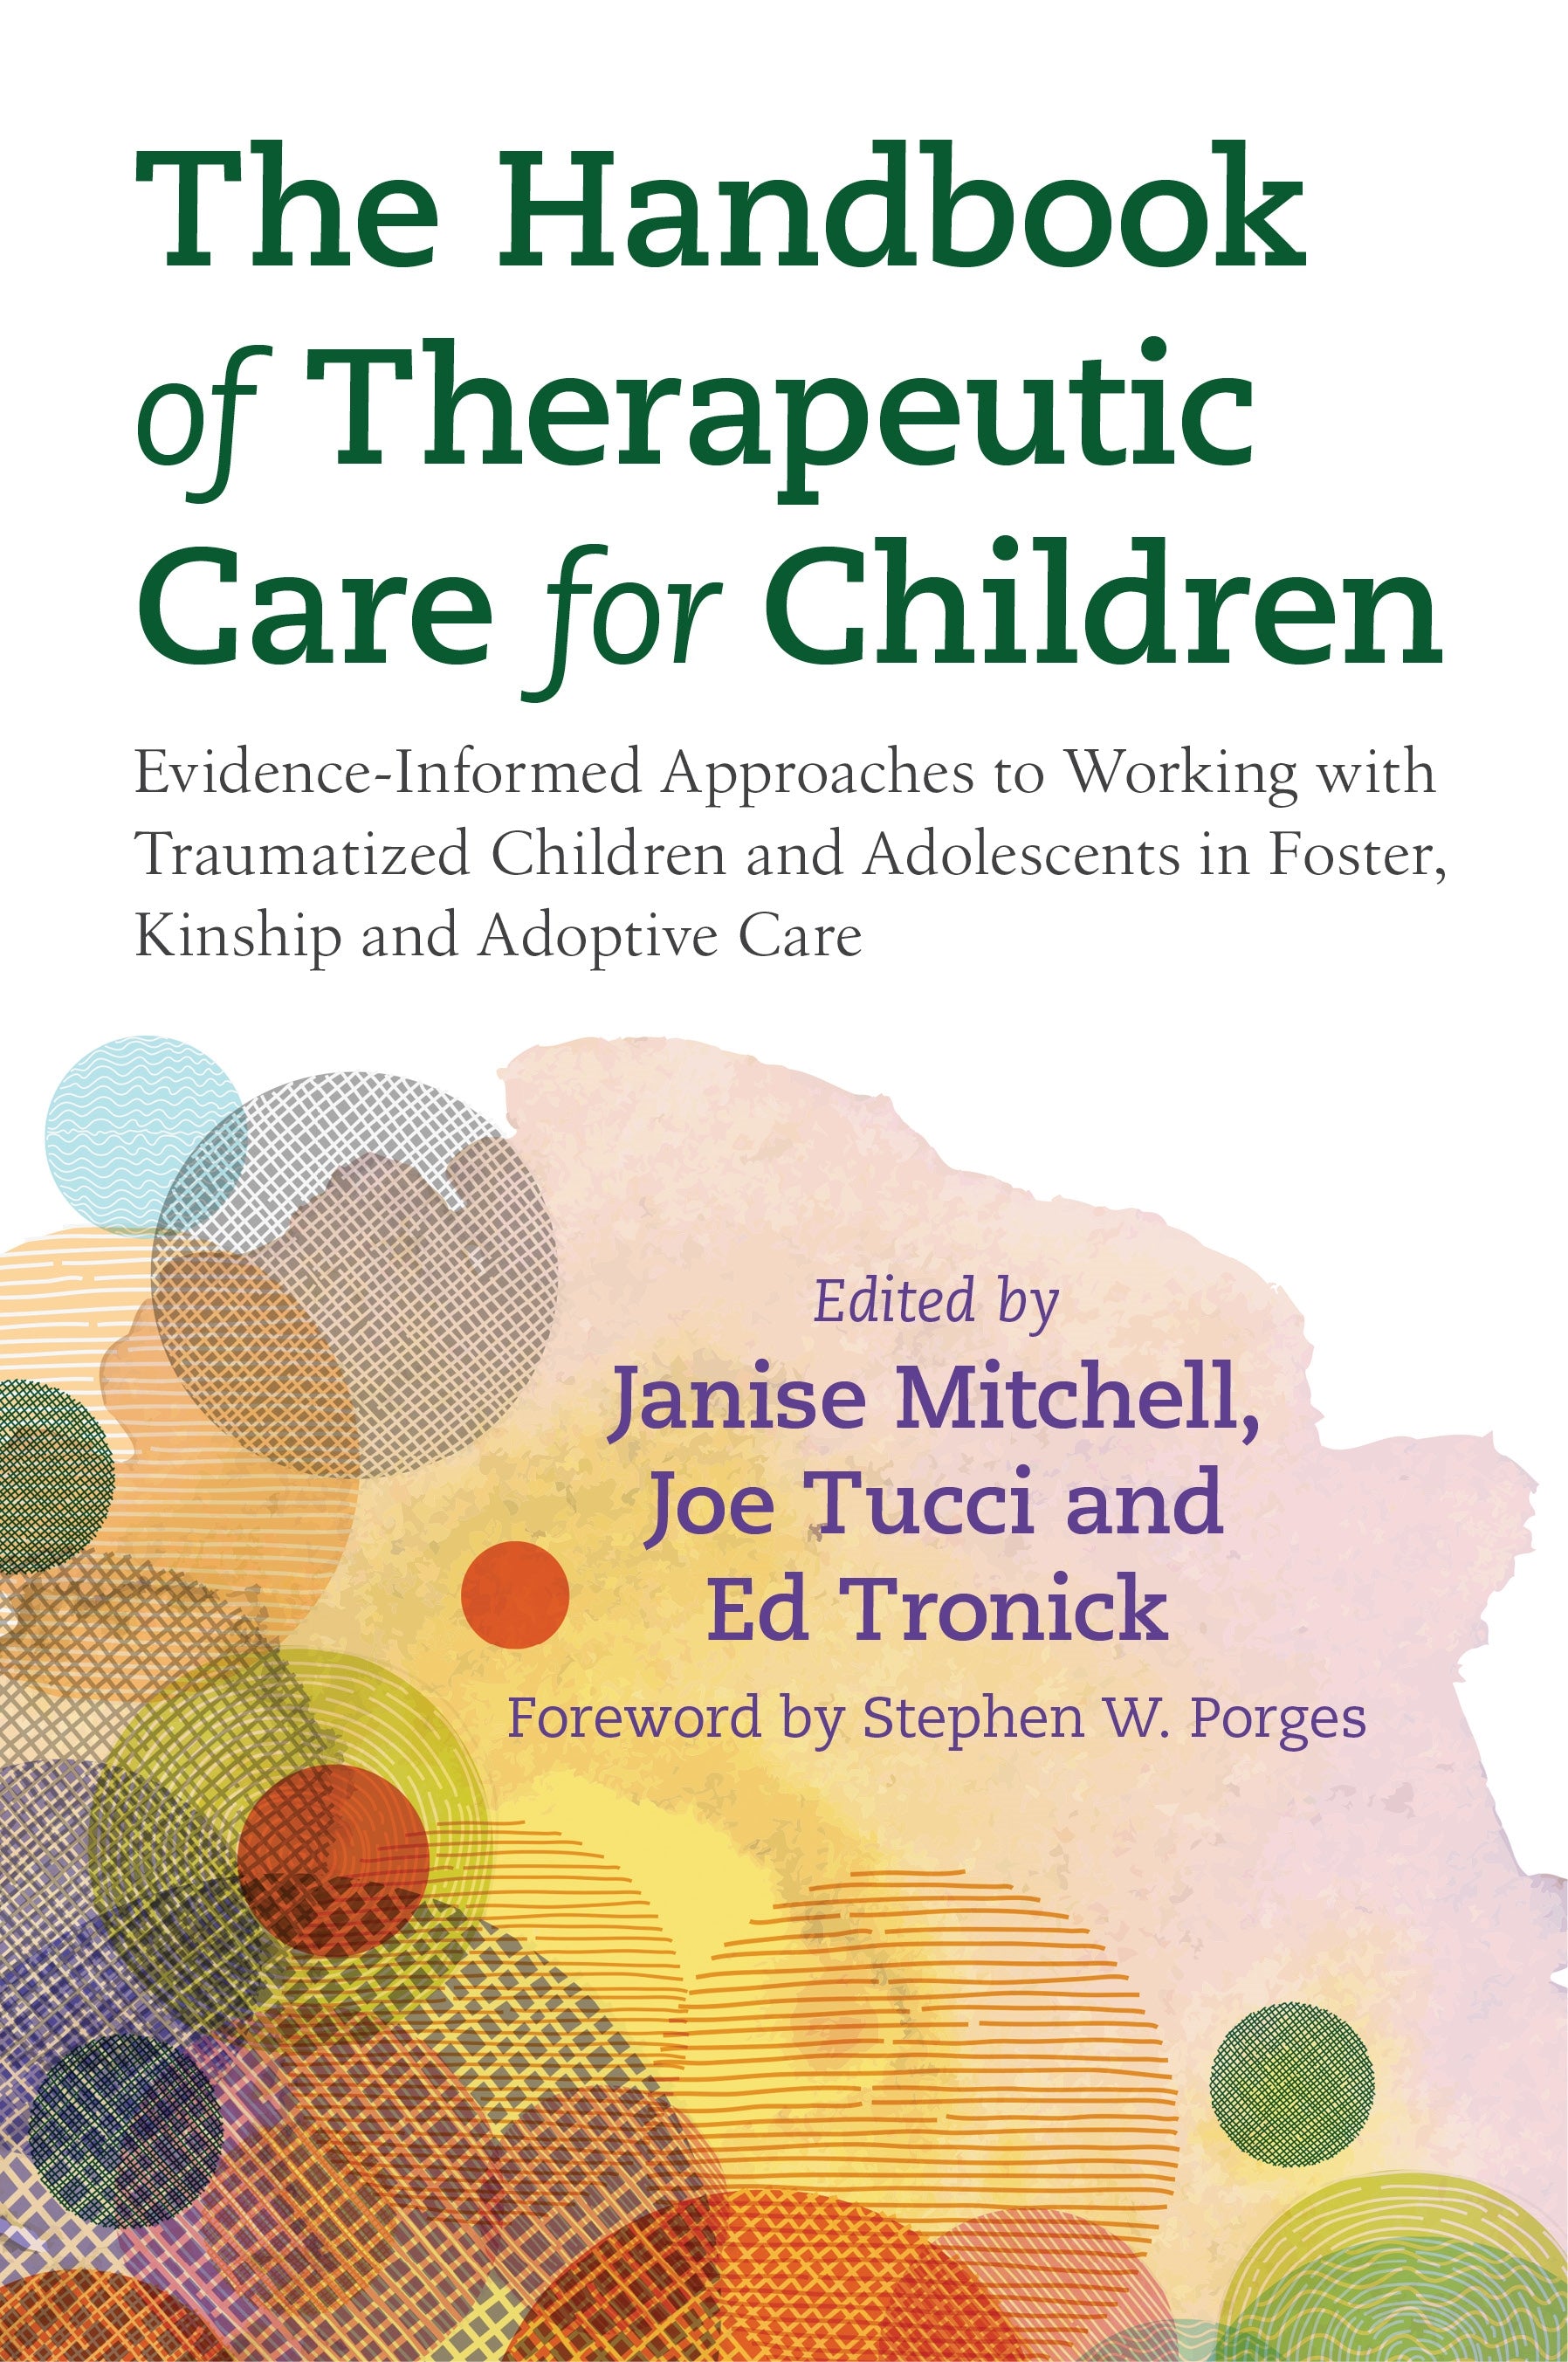 The Handbook of Therapeutic Care for Children by Stephen W. Porges, Janise Mitchell, Joe Tucci, Edward C Tronick